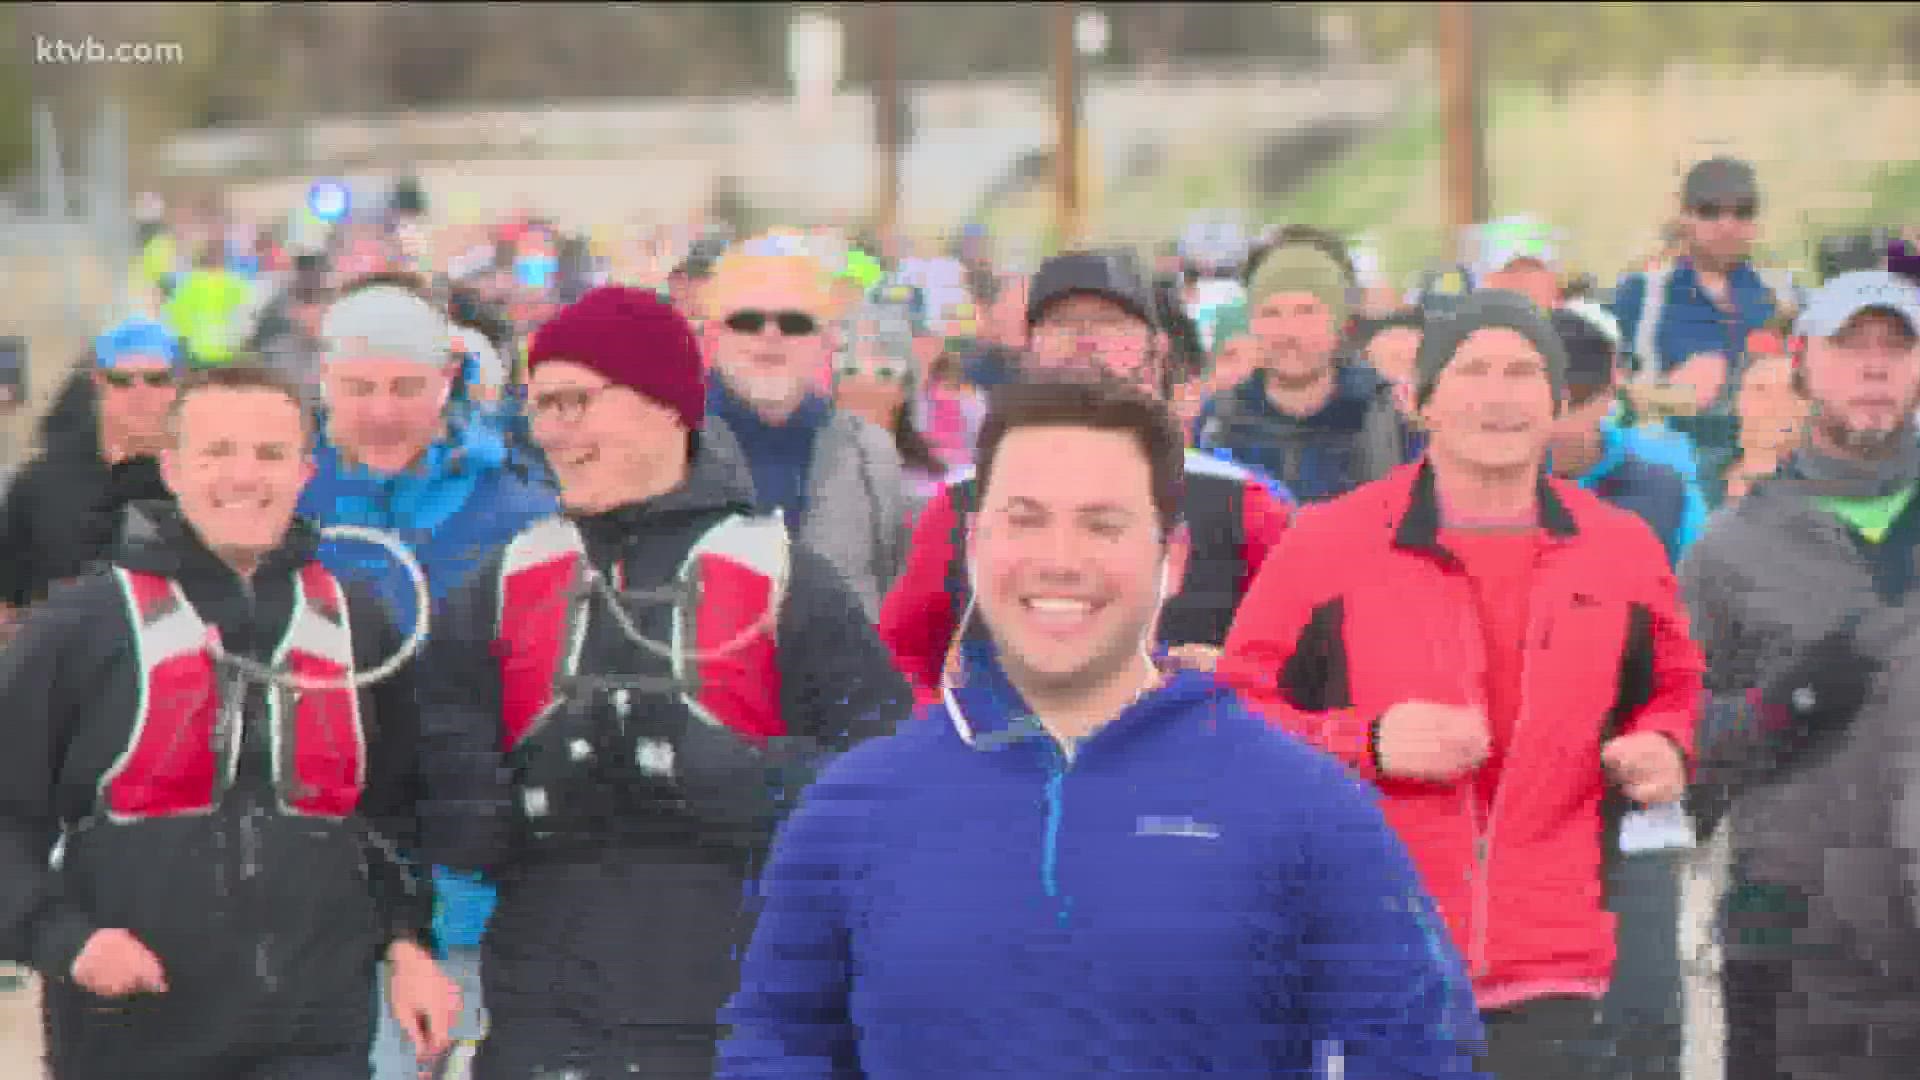 Billed as "one of the toughest races in the Northwest," the popular Race to Robie Creek half-marathon got underway in Boise Saturday amid chilly temperatures.